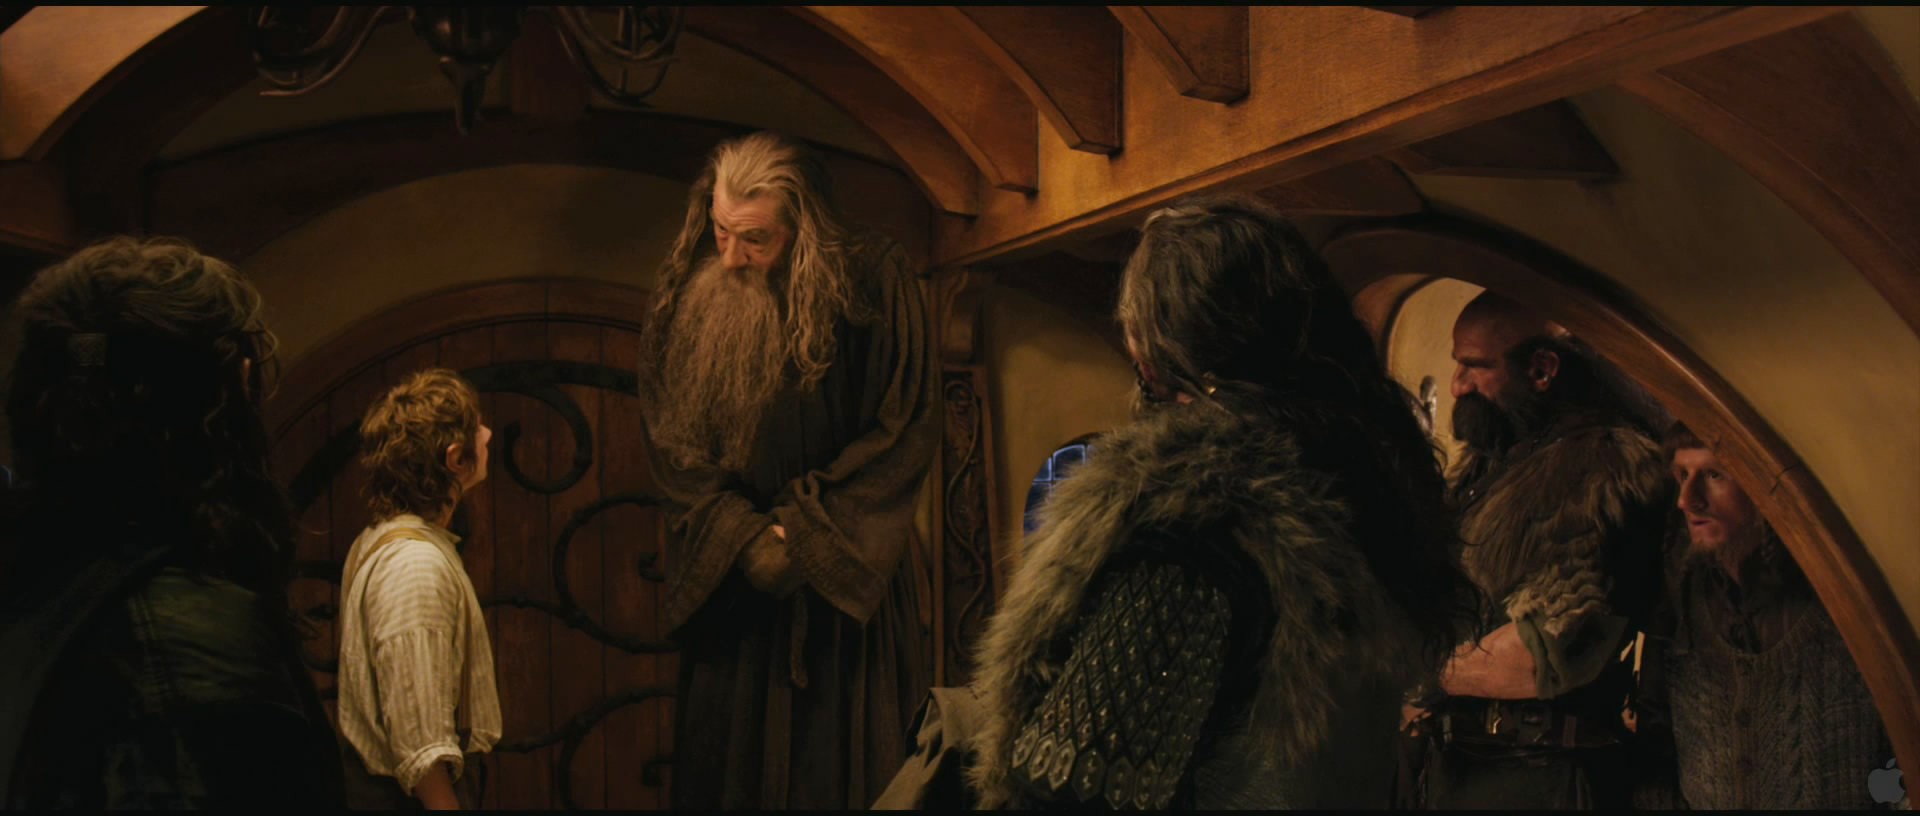 Movie The Hobbit An Unexpected Journey 1920x816